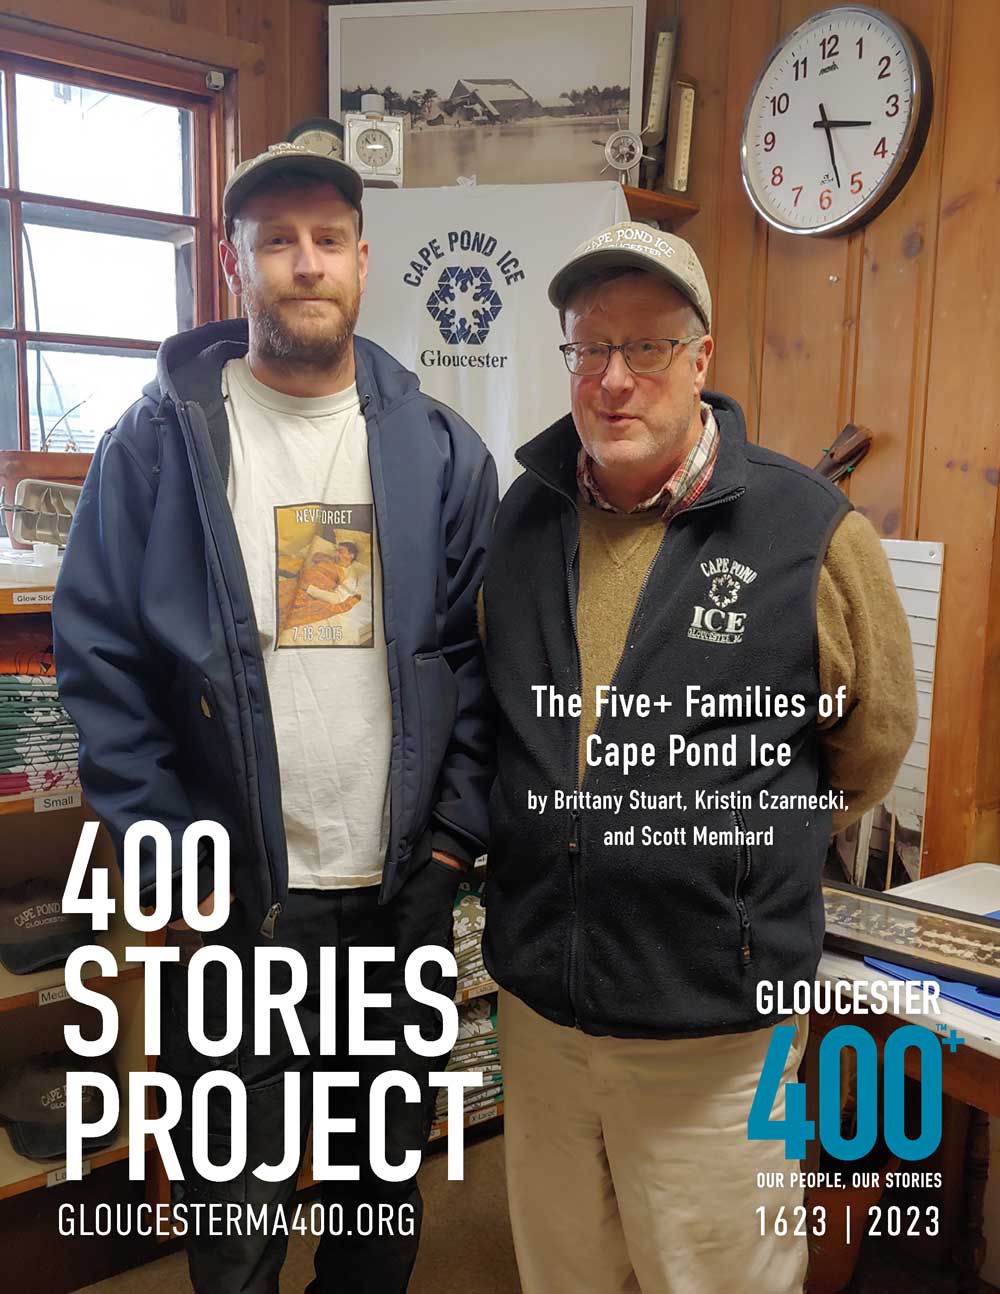 The Five+ Families of Cape Pond Ice